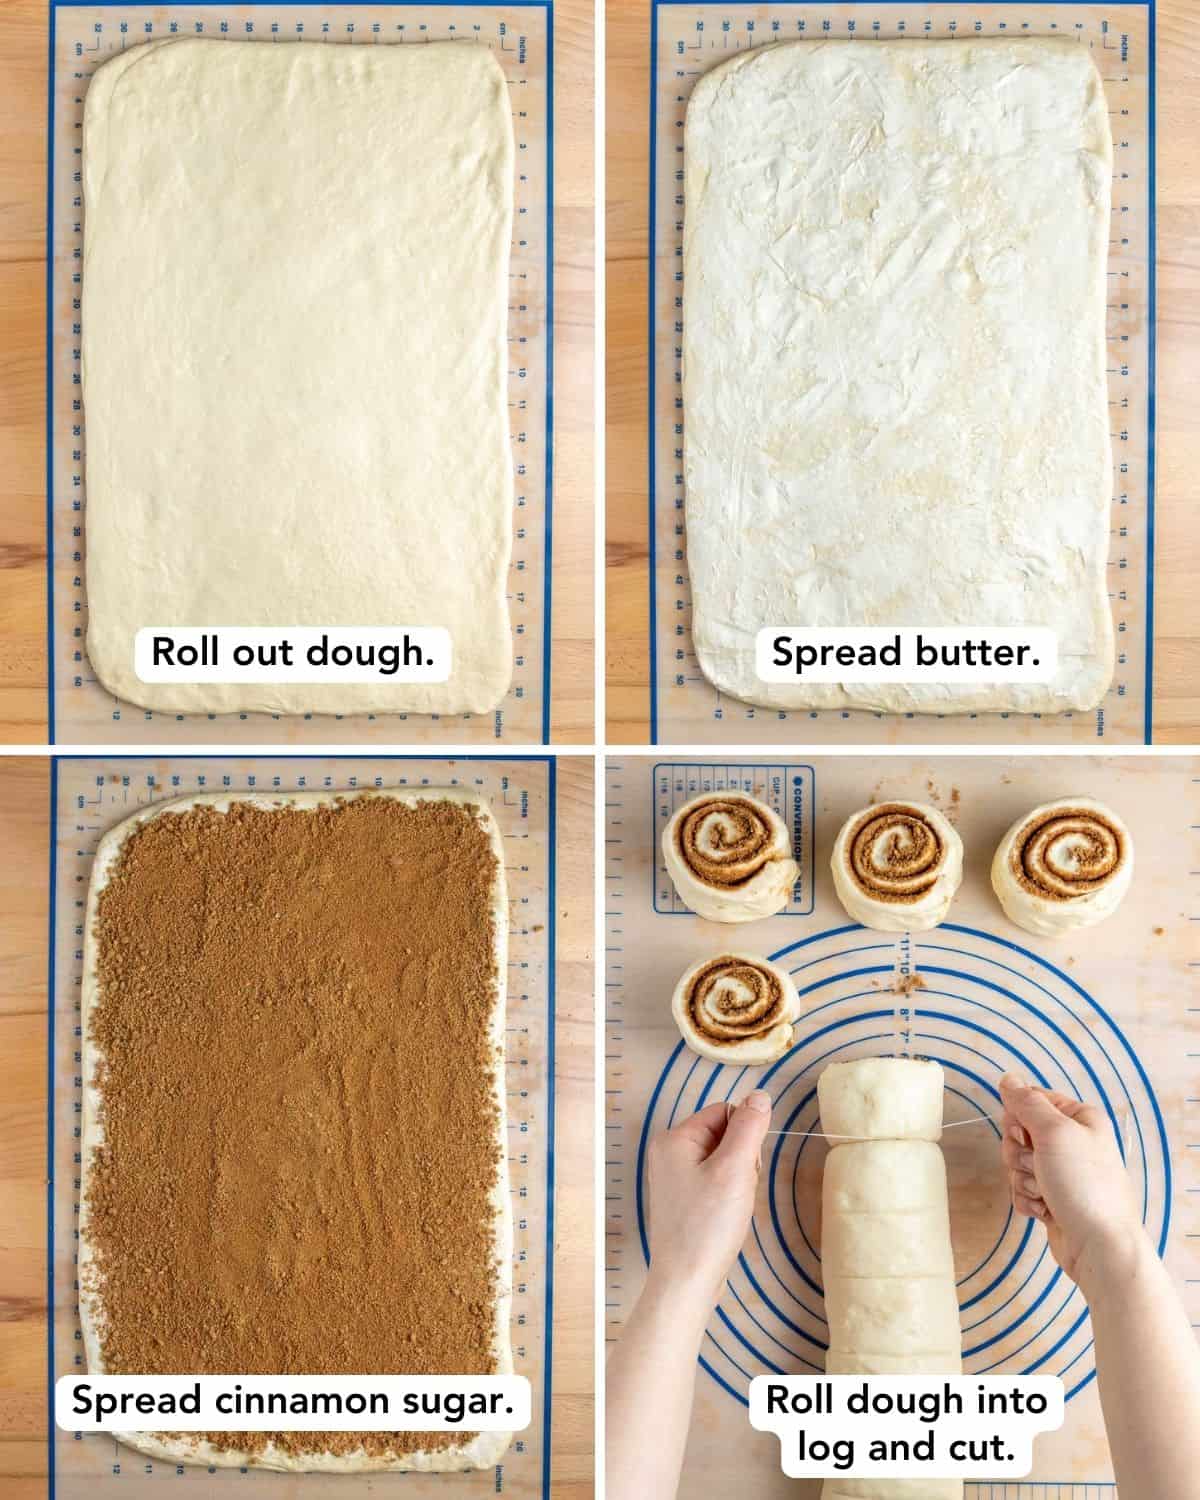 four panel image of dough being rolled out, spread with butter, topped with cinnamon sugar, and being rolled and cut